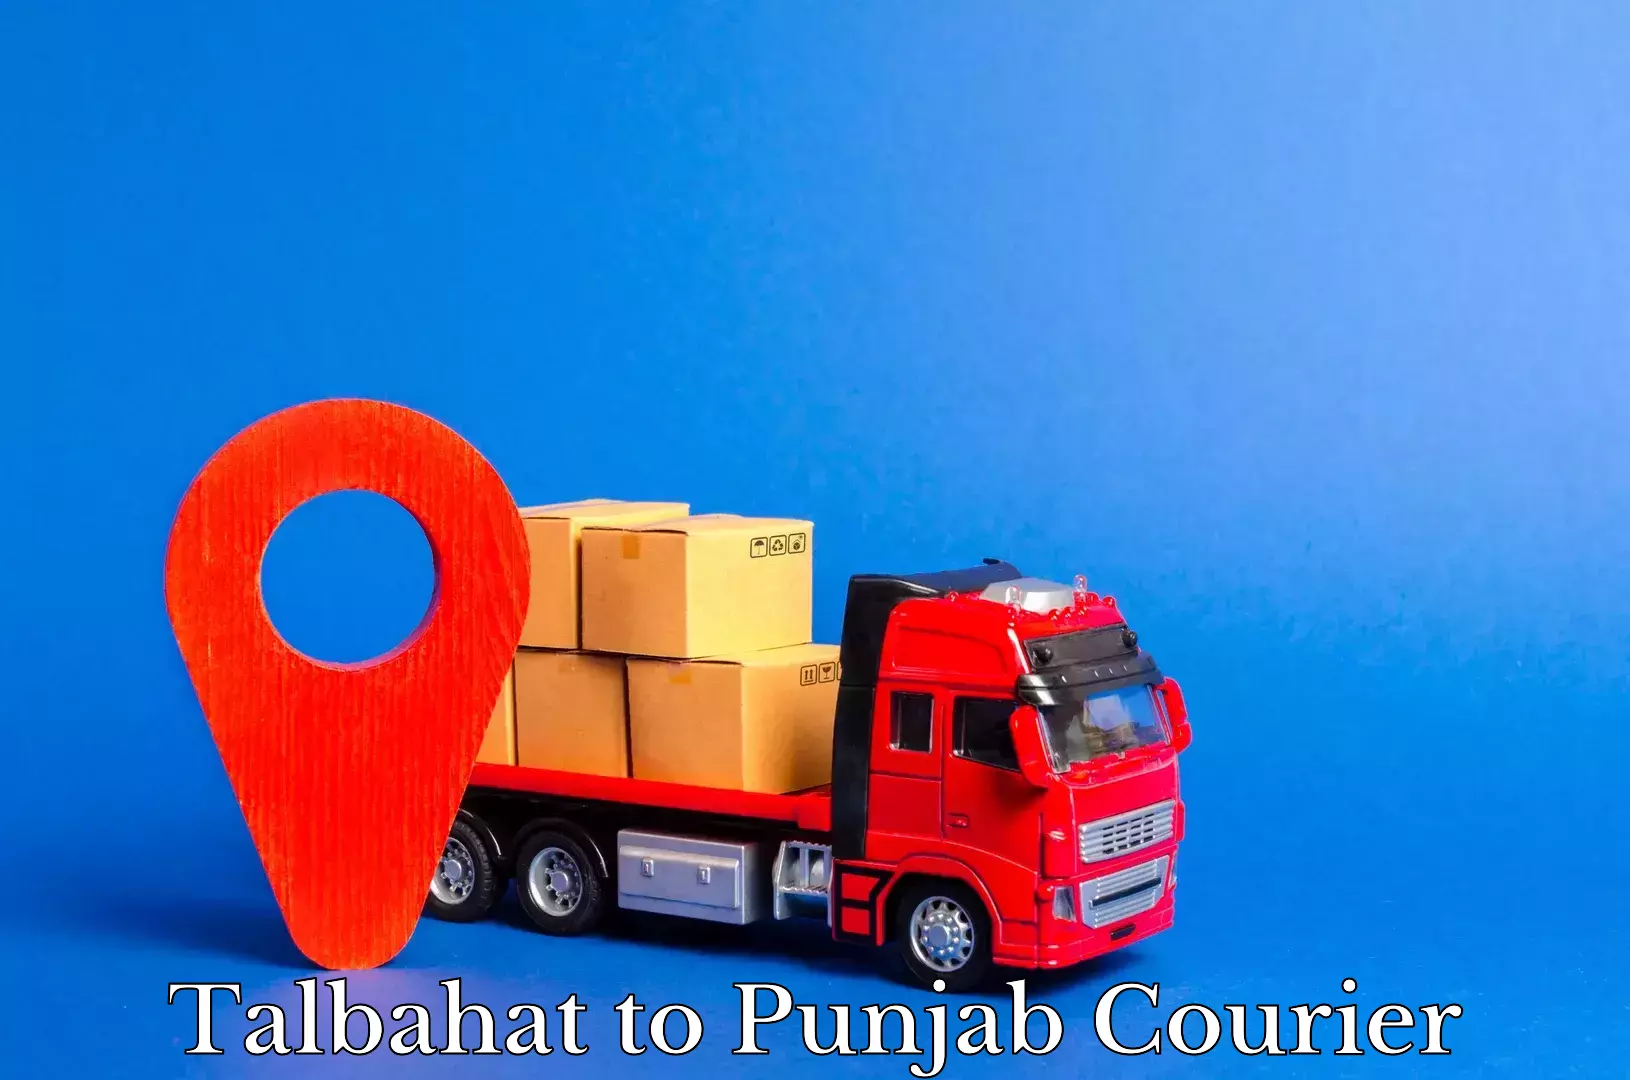 Premium courier services Talbahat to Punjab